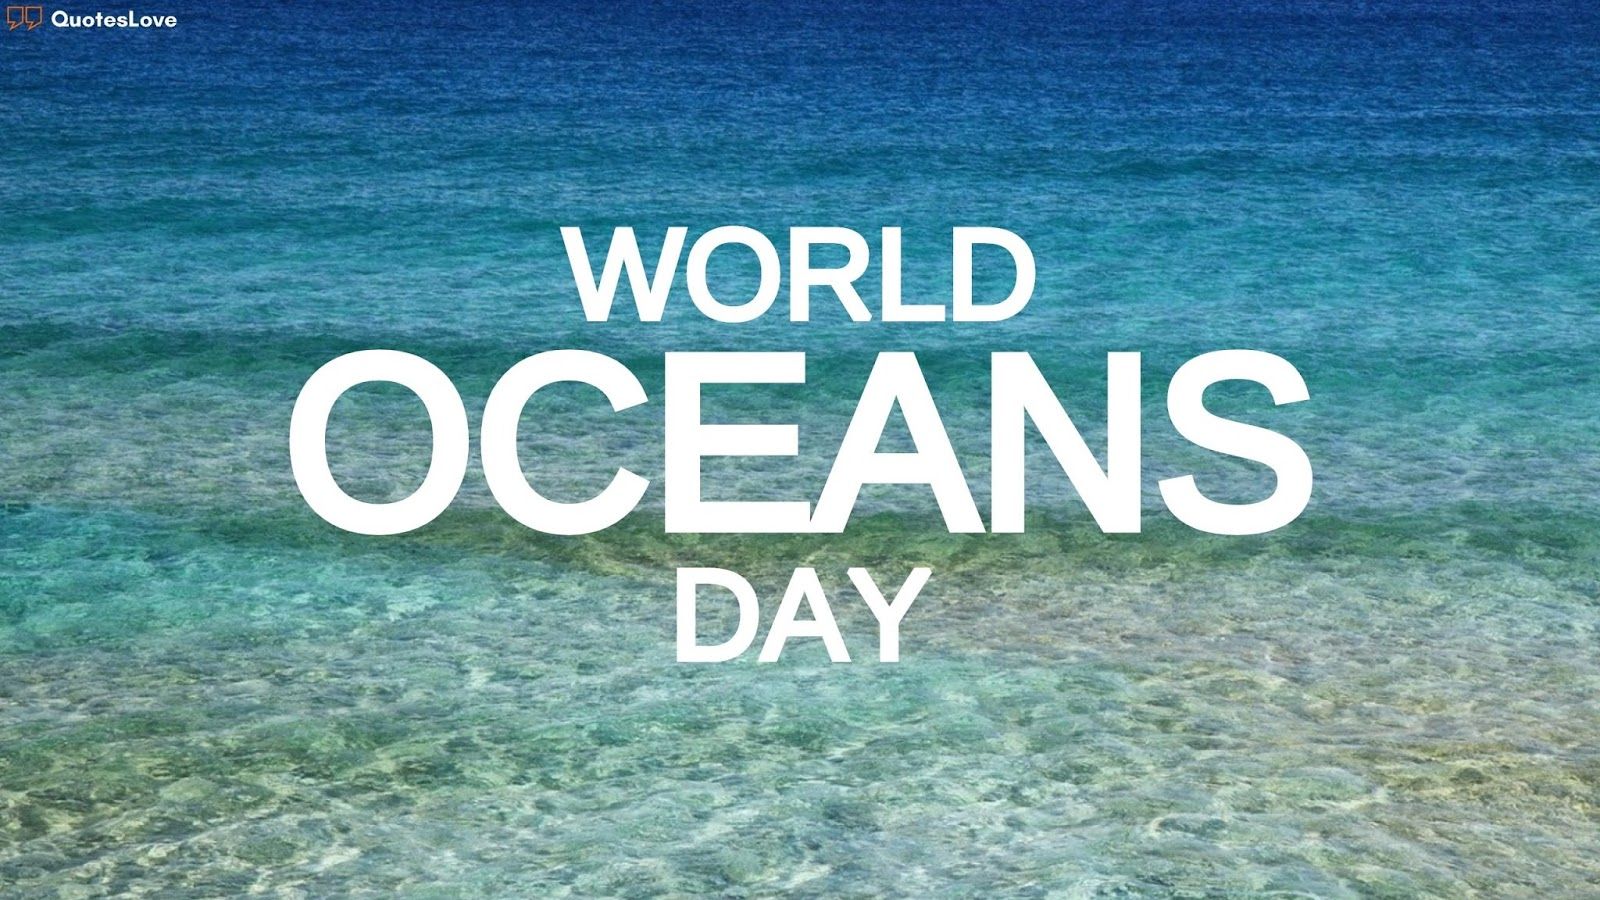 [Best] World Oceans Day 2021: Quotes, Wishes, Messages, Greetings, Image, Photo, Picture, Poster, Wallpaper